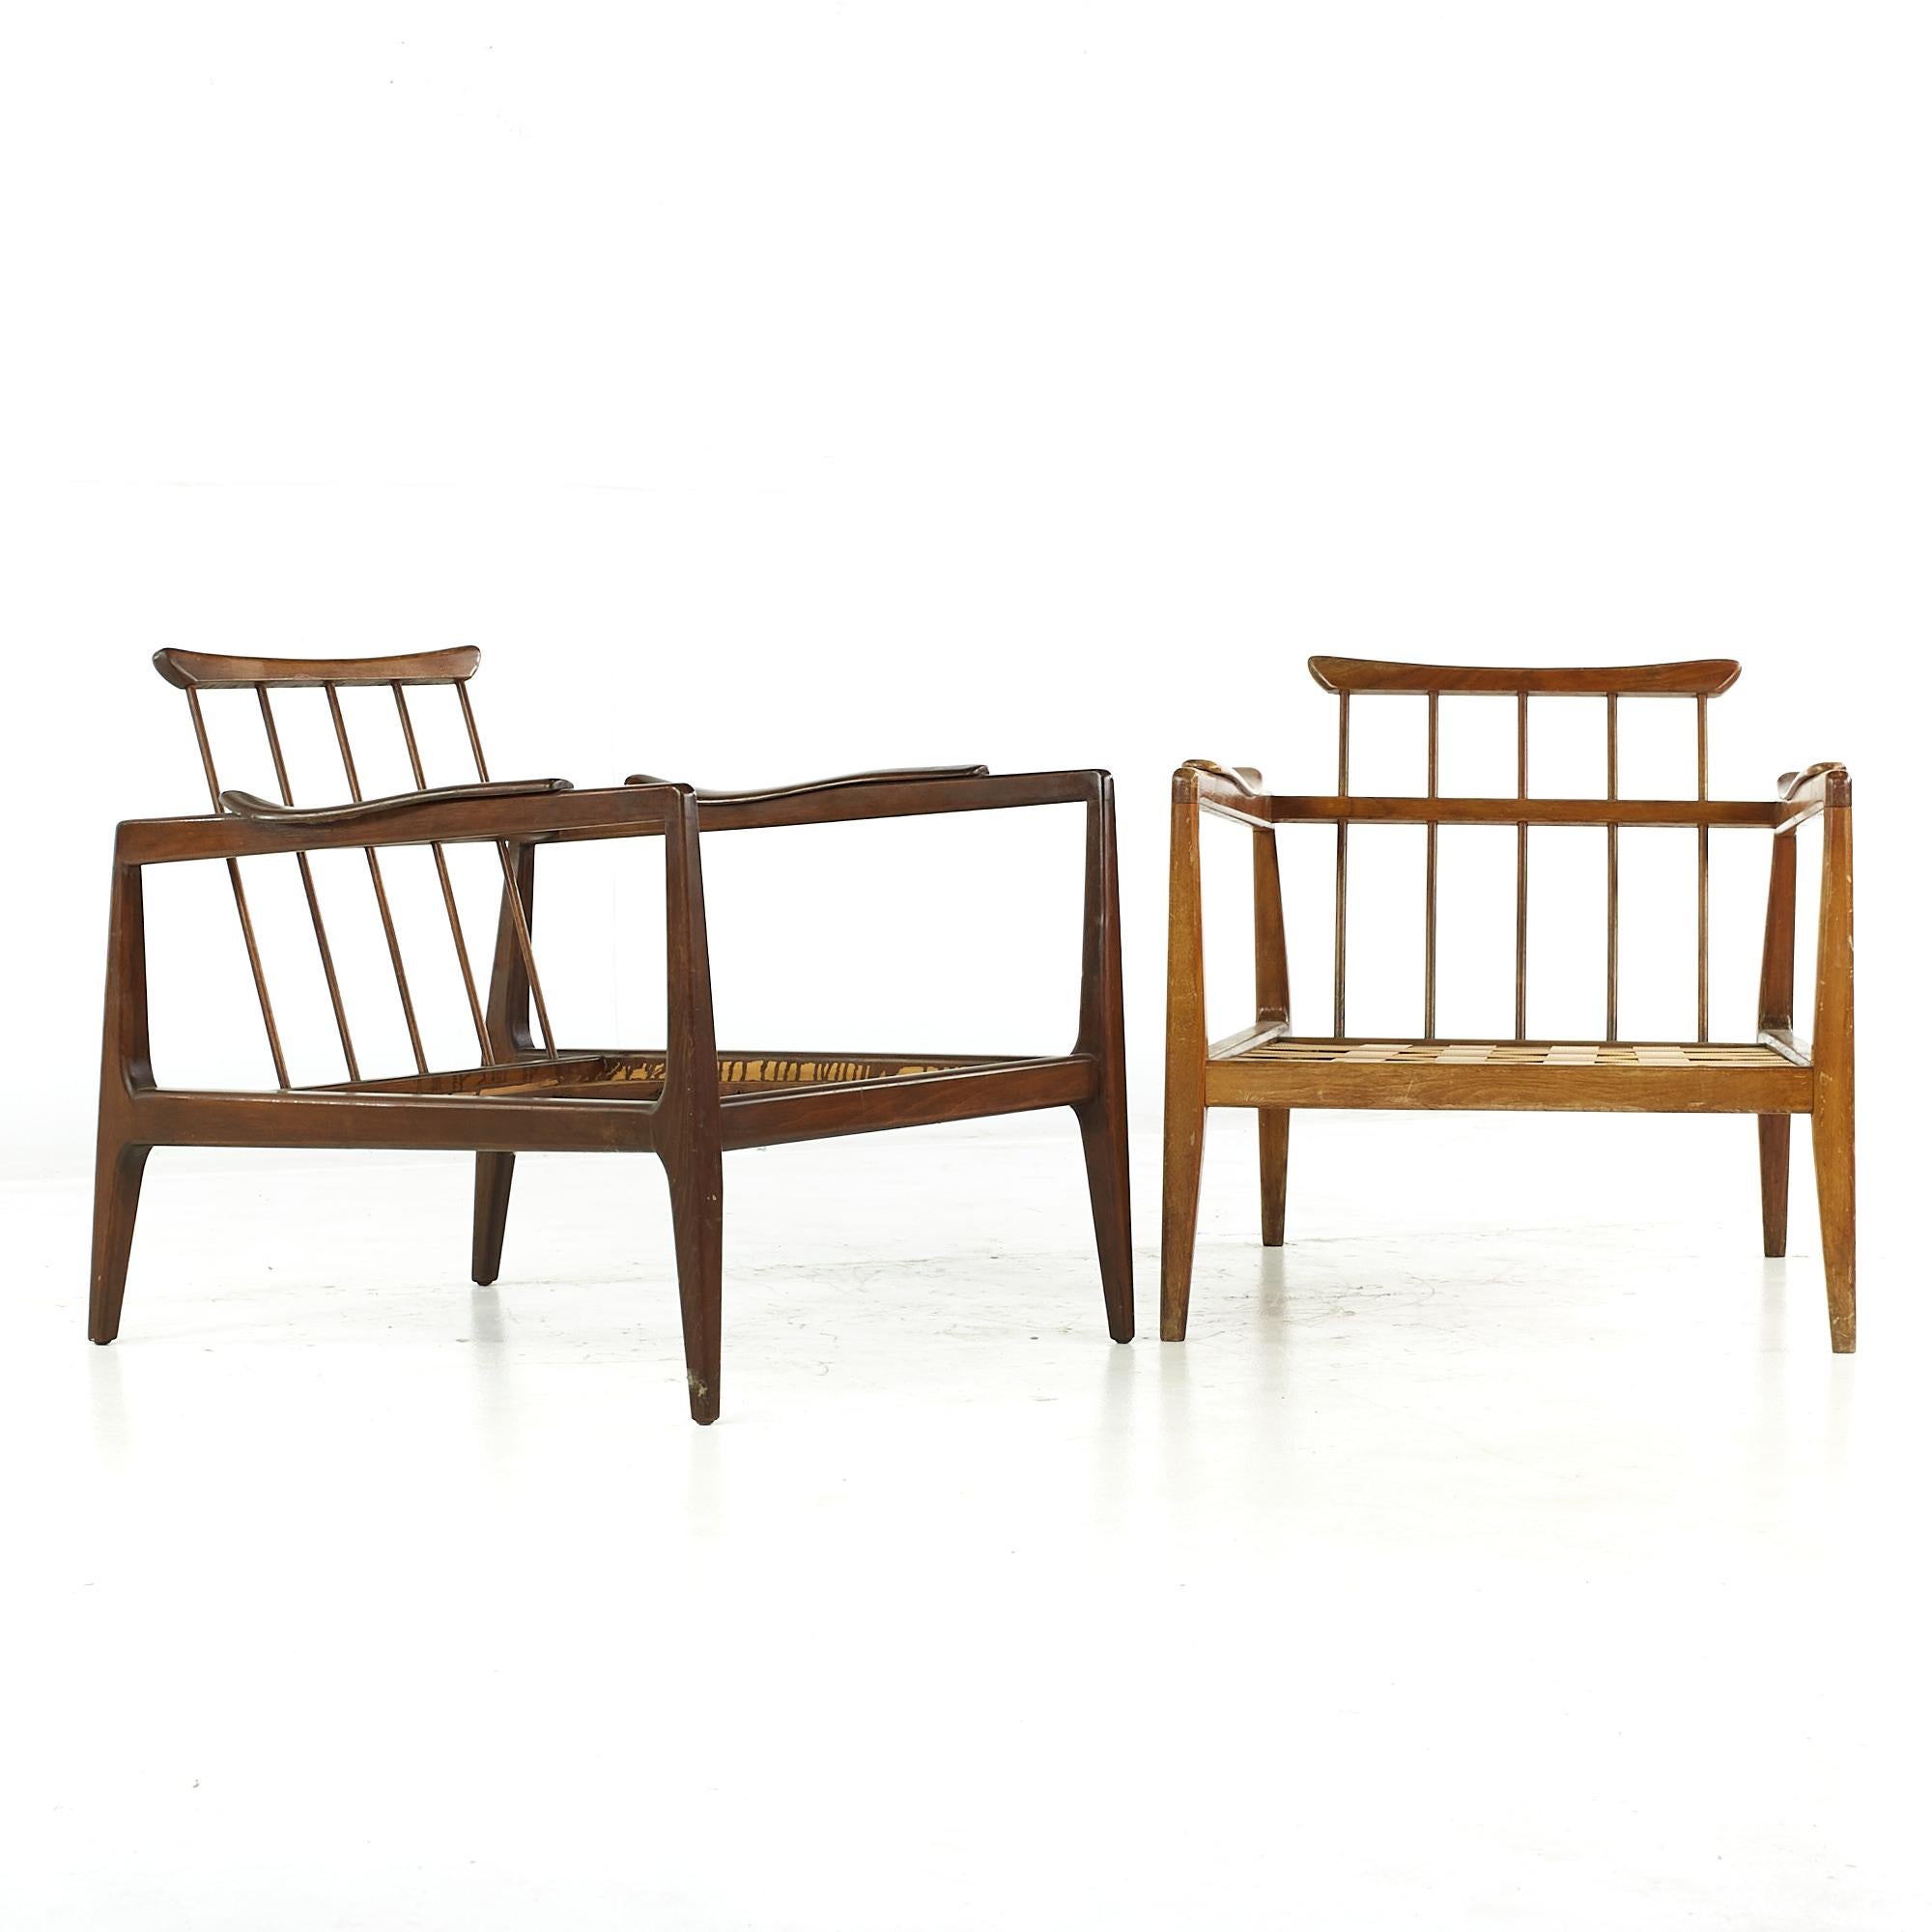 Edmond Spence mid-century lounge chairs - pair.

Each chair measures: 27 wide x 33.5 deep x 28 high, with a seat height of 13 (without cushion) and arm height/chair clearance 23 inches

All pieces of furniture can be had in what we call restored